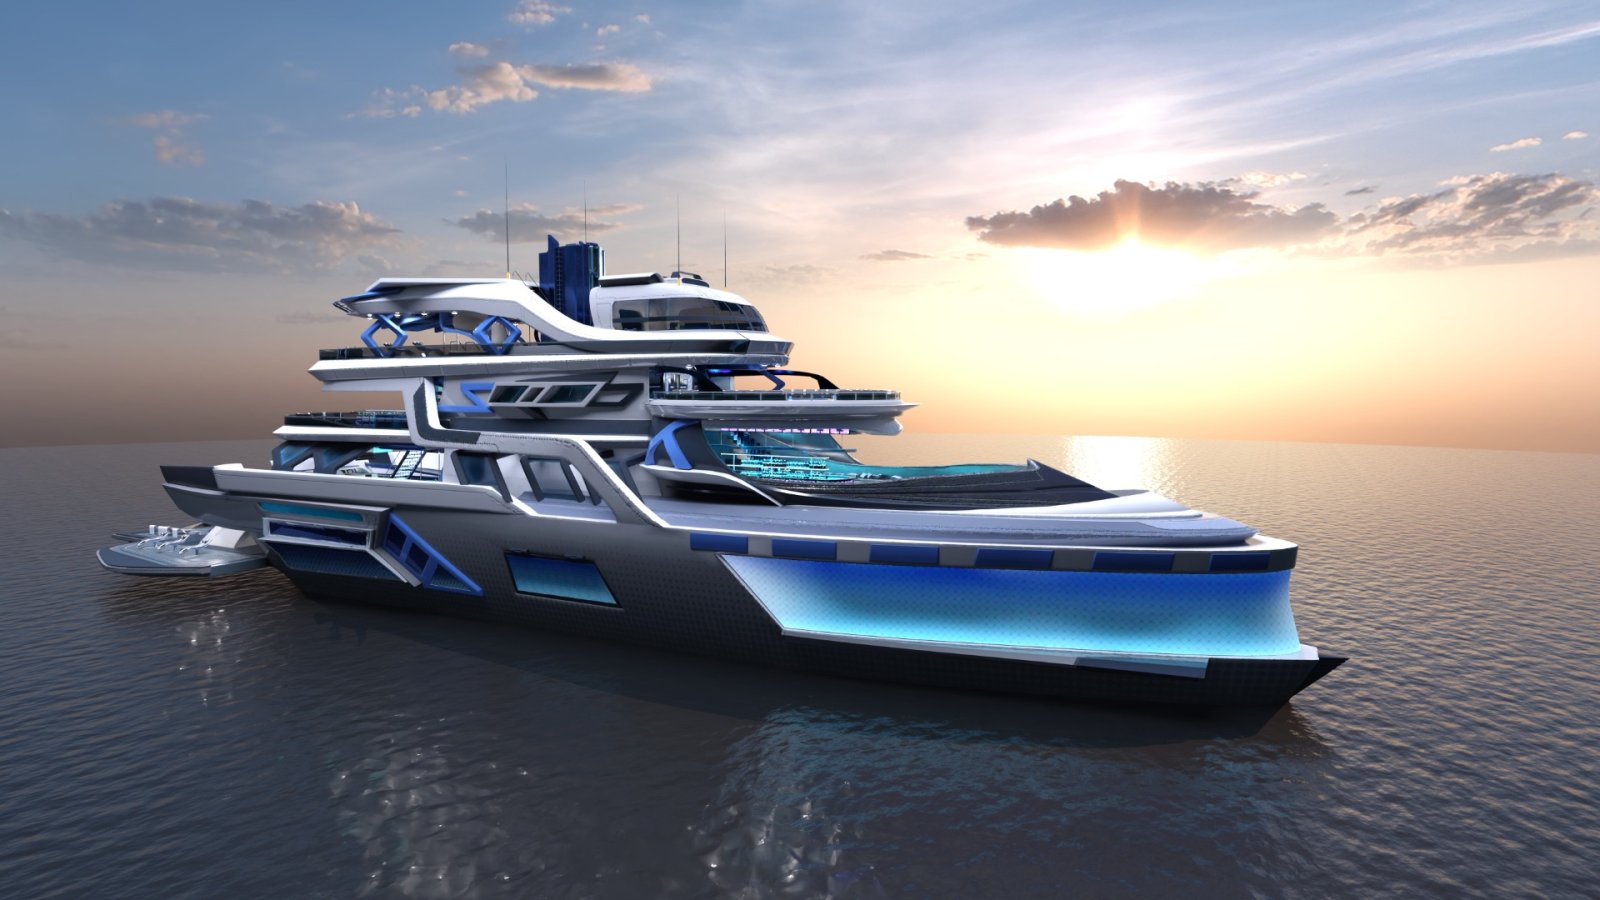 Discover this young designer's vision for futuristic luxury and superyachts